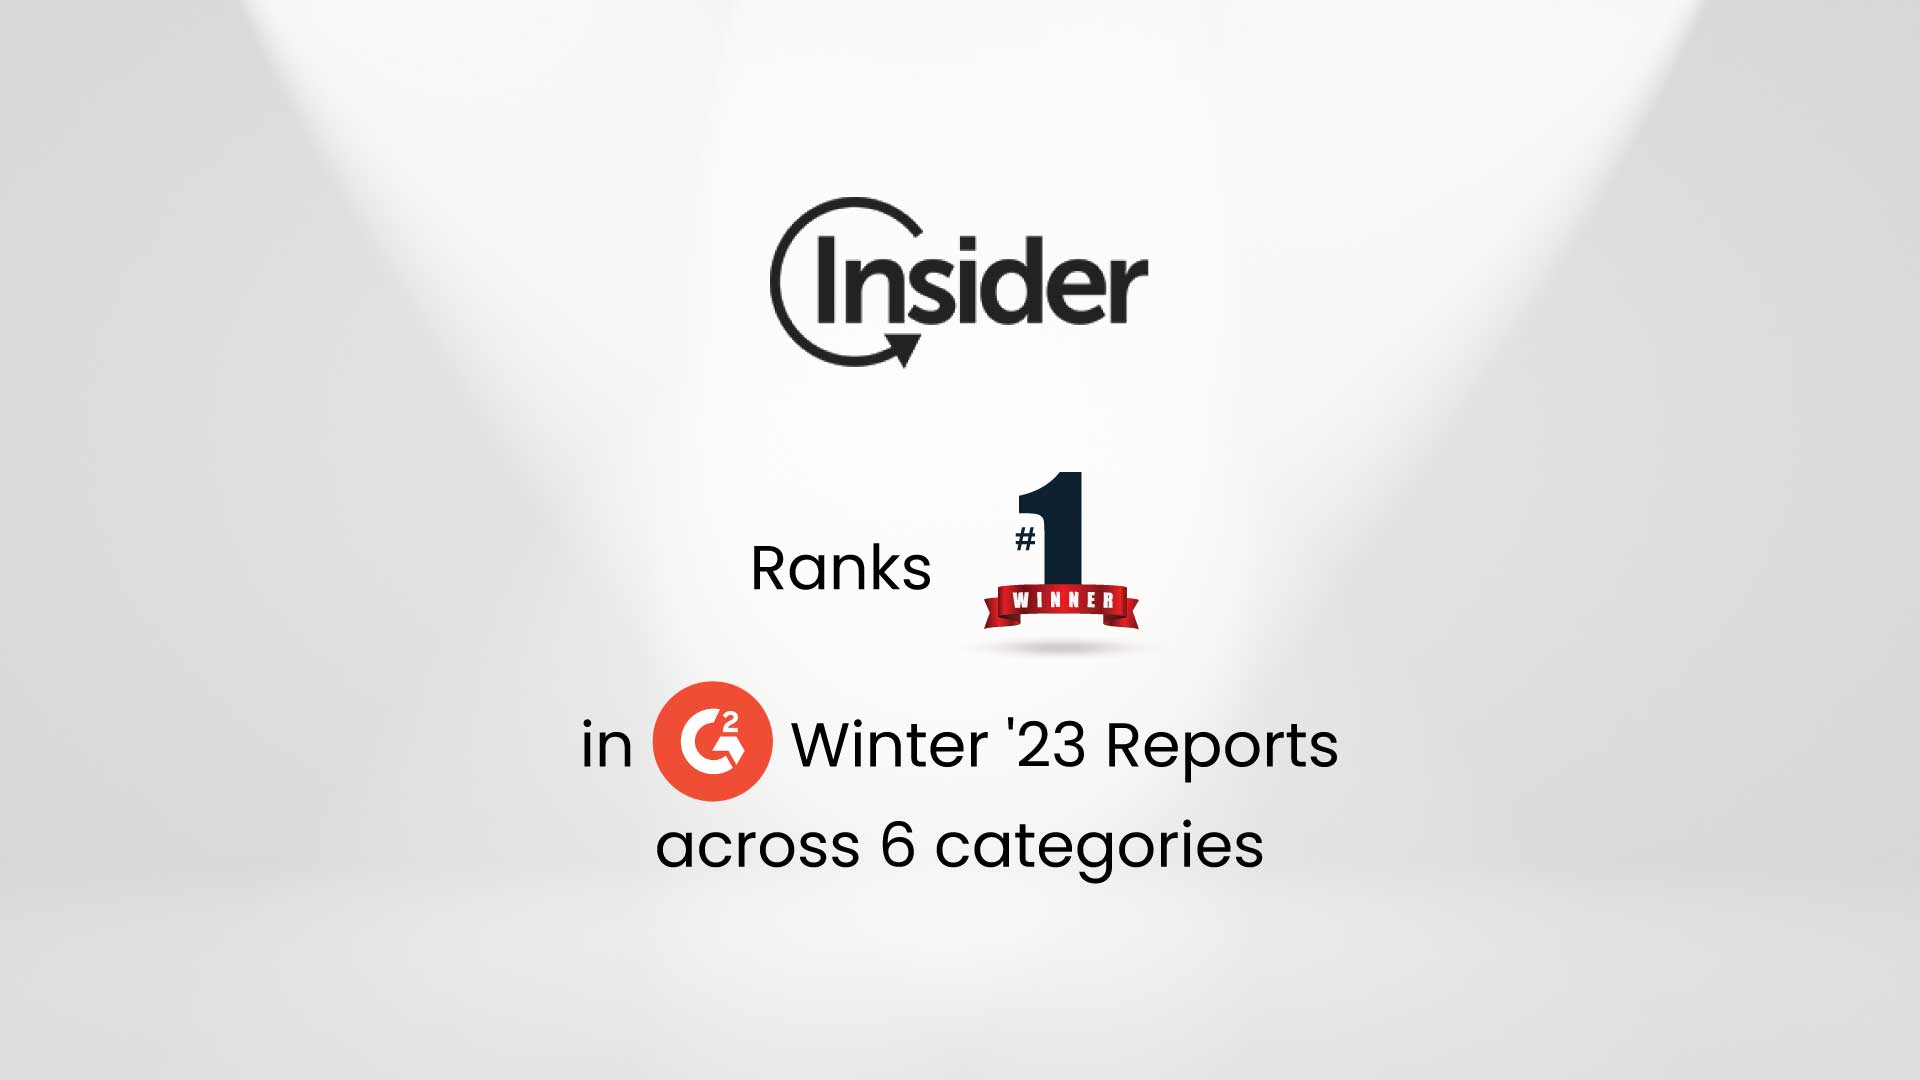 Insider ranks #1 in G2 Winter '23 Reports across 6 categories including Customer Data Platforms, Mobile Marketing, and Personalization